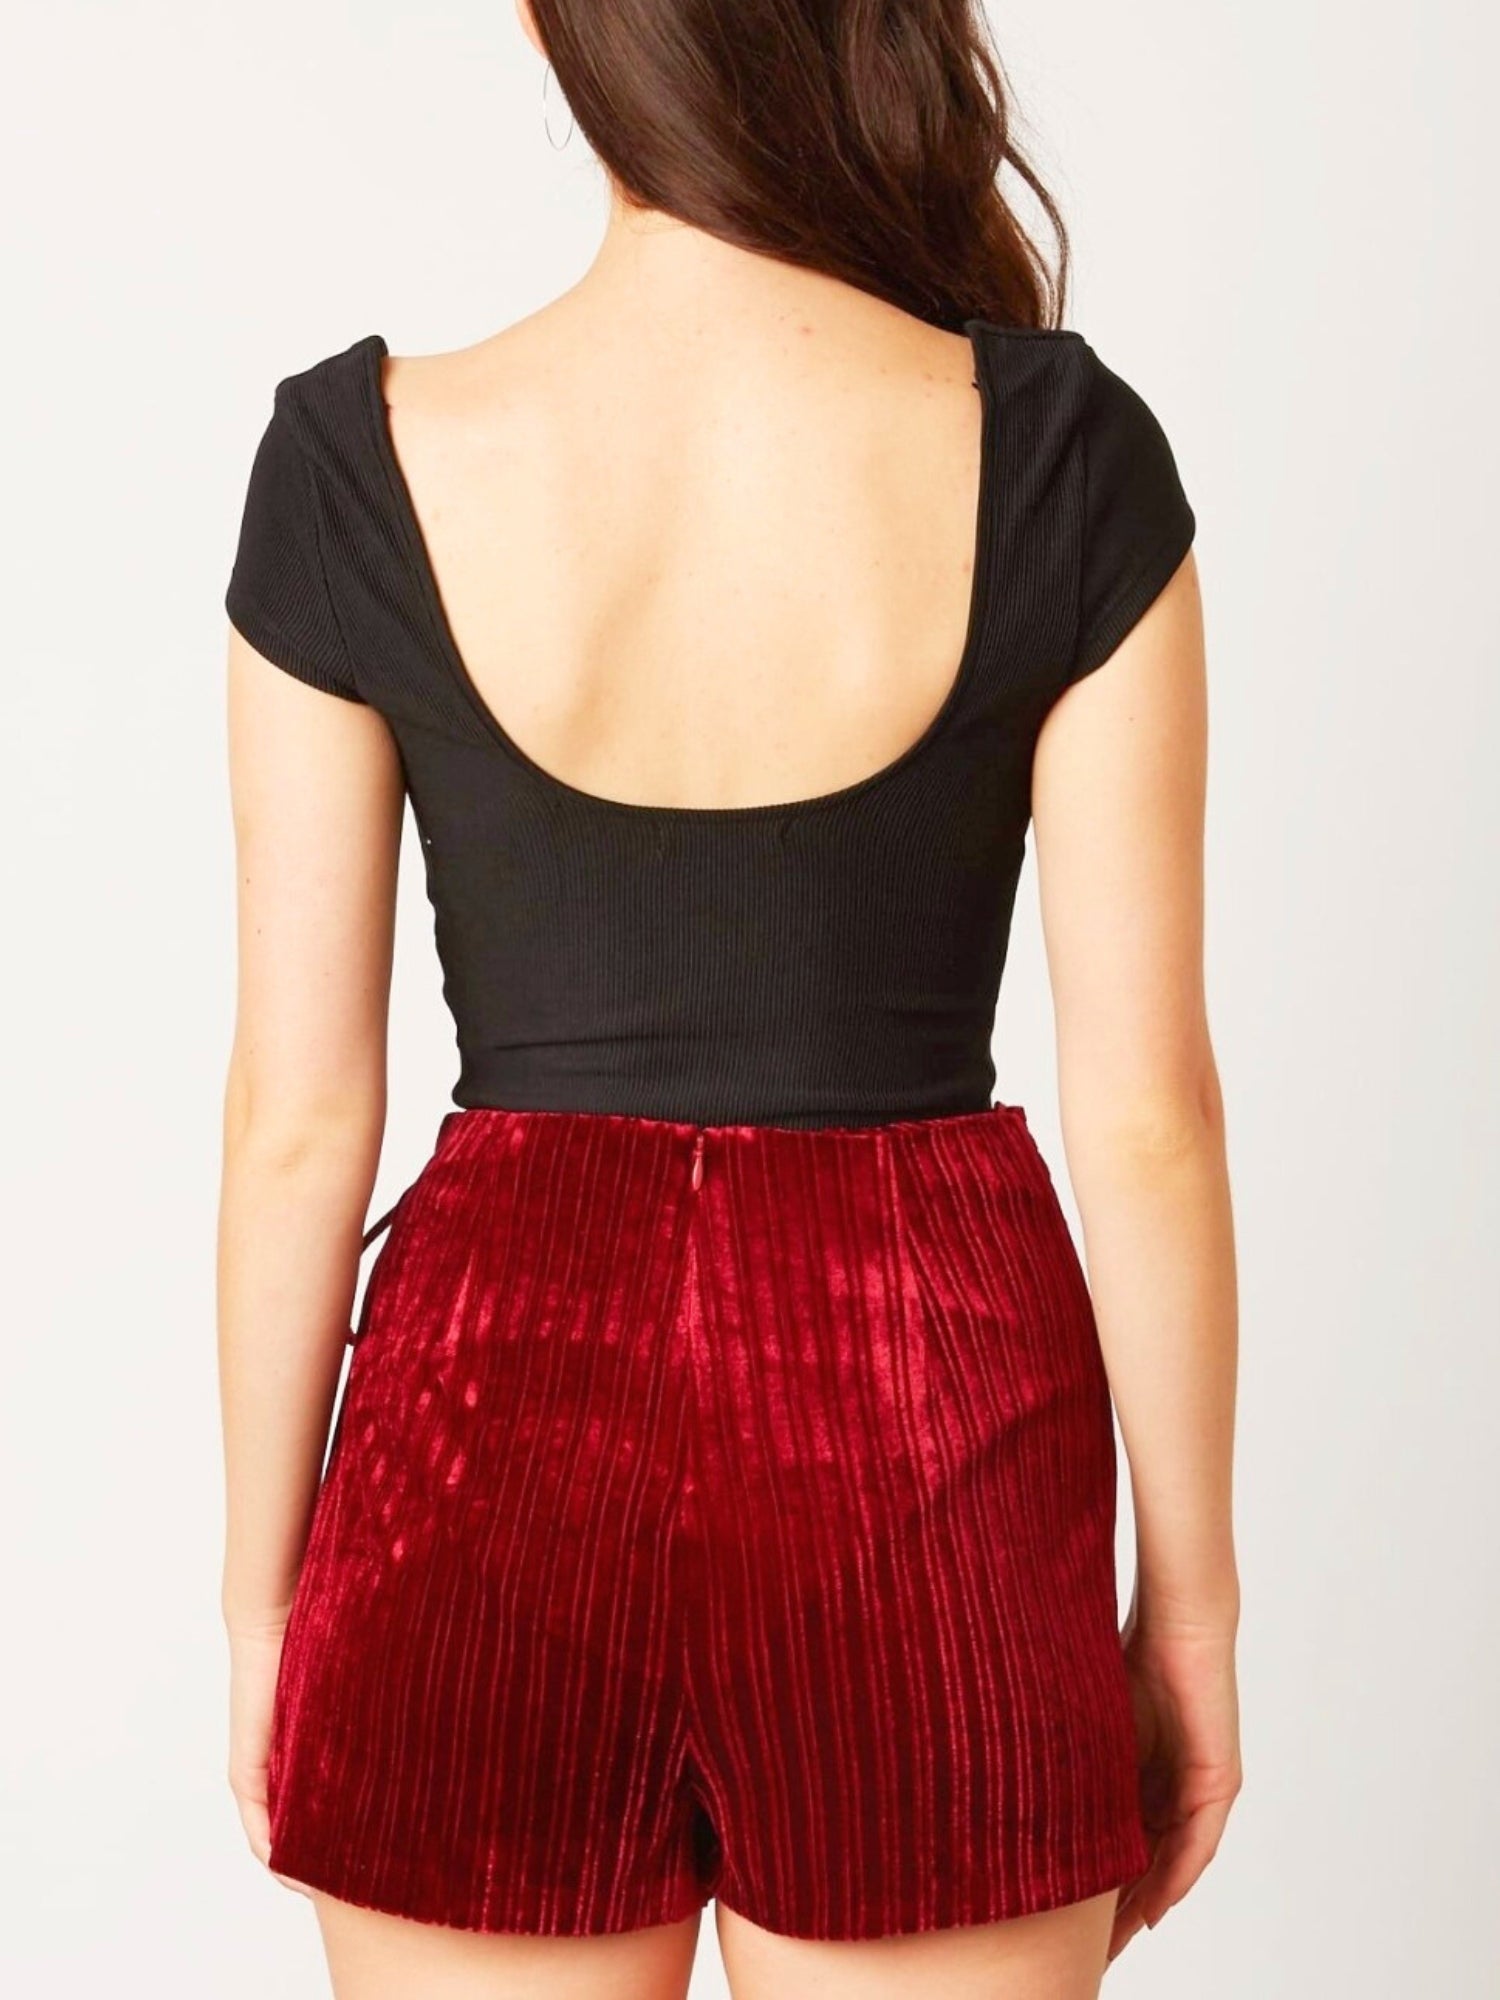 The Red Door Mini Skort - The Red Door Mini Skort is the perfect addition to your wardrobe. Featuring an invisible zipper, this skort is made from vegan velvet and is the perfect length to wear with our summer blouses and platforms. - Ivory Sheep Collecti